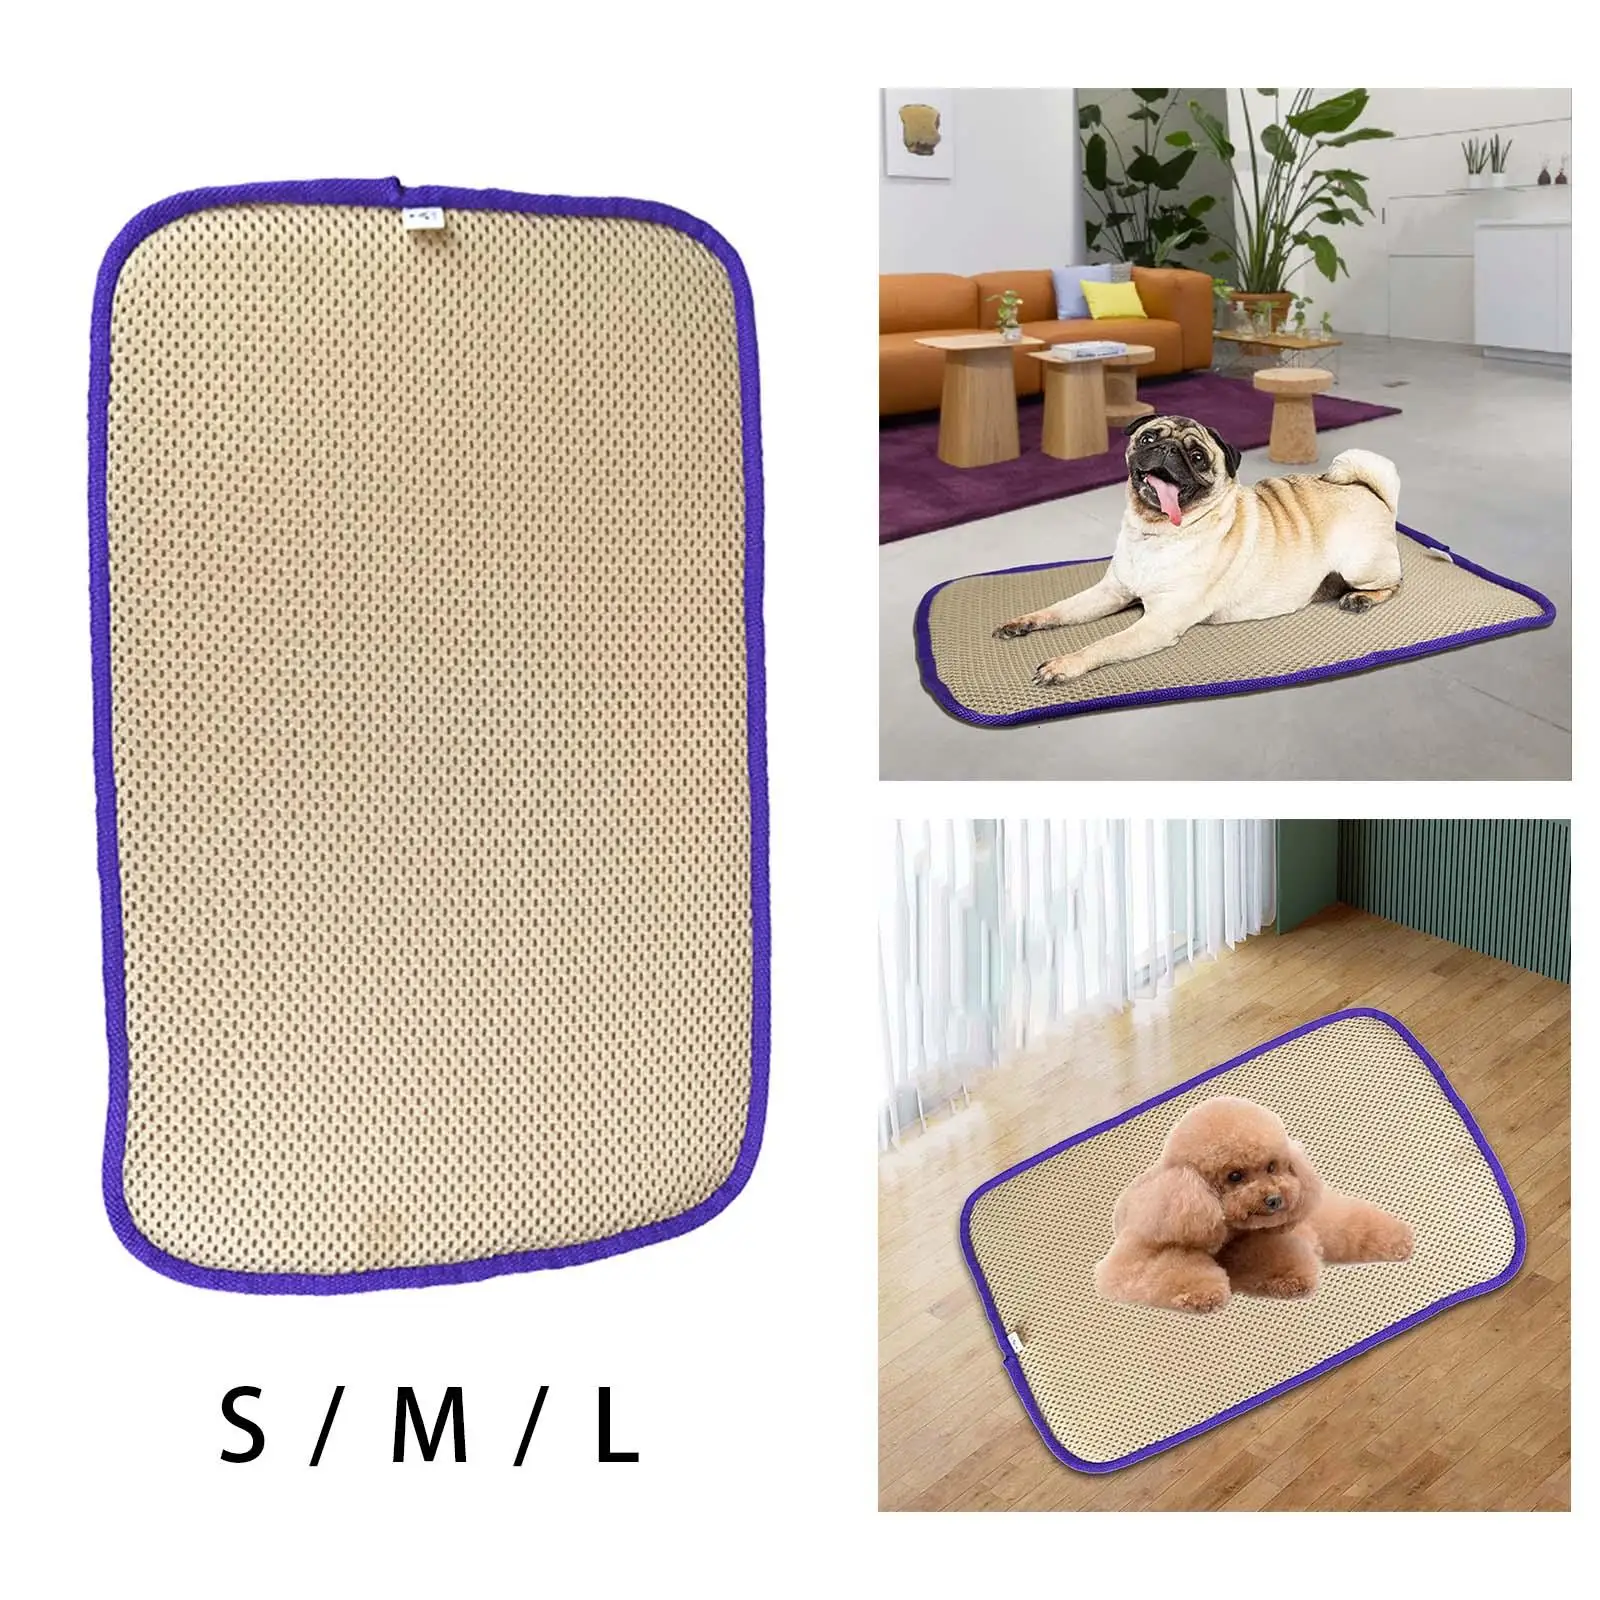 Dog Cooling Mat Dog Pad Blanket Cat Cooling Blanket Puppy Sleep Cushion Pet Cool Mat Sleeping Bed for Sofa Bed Car